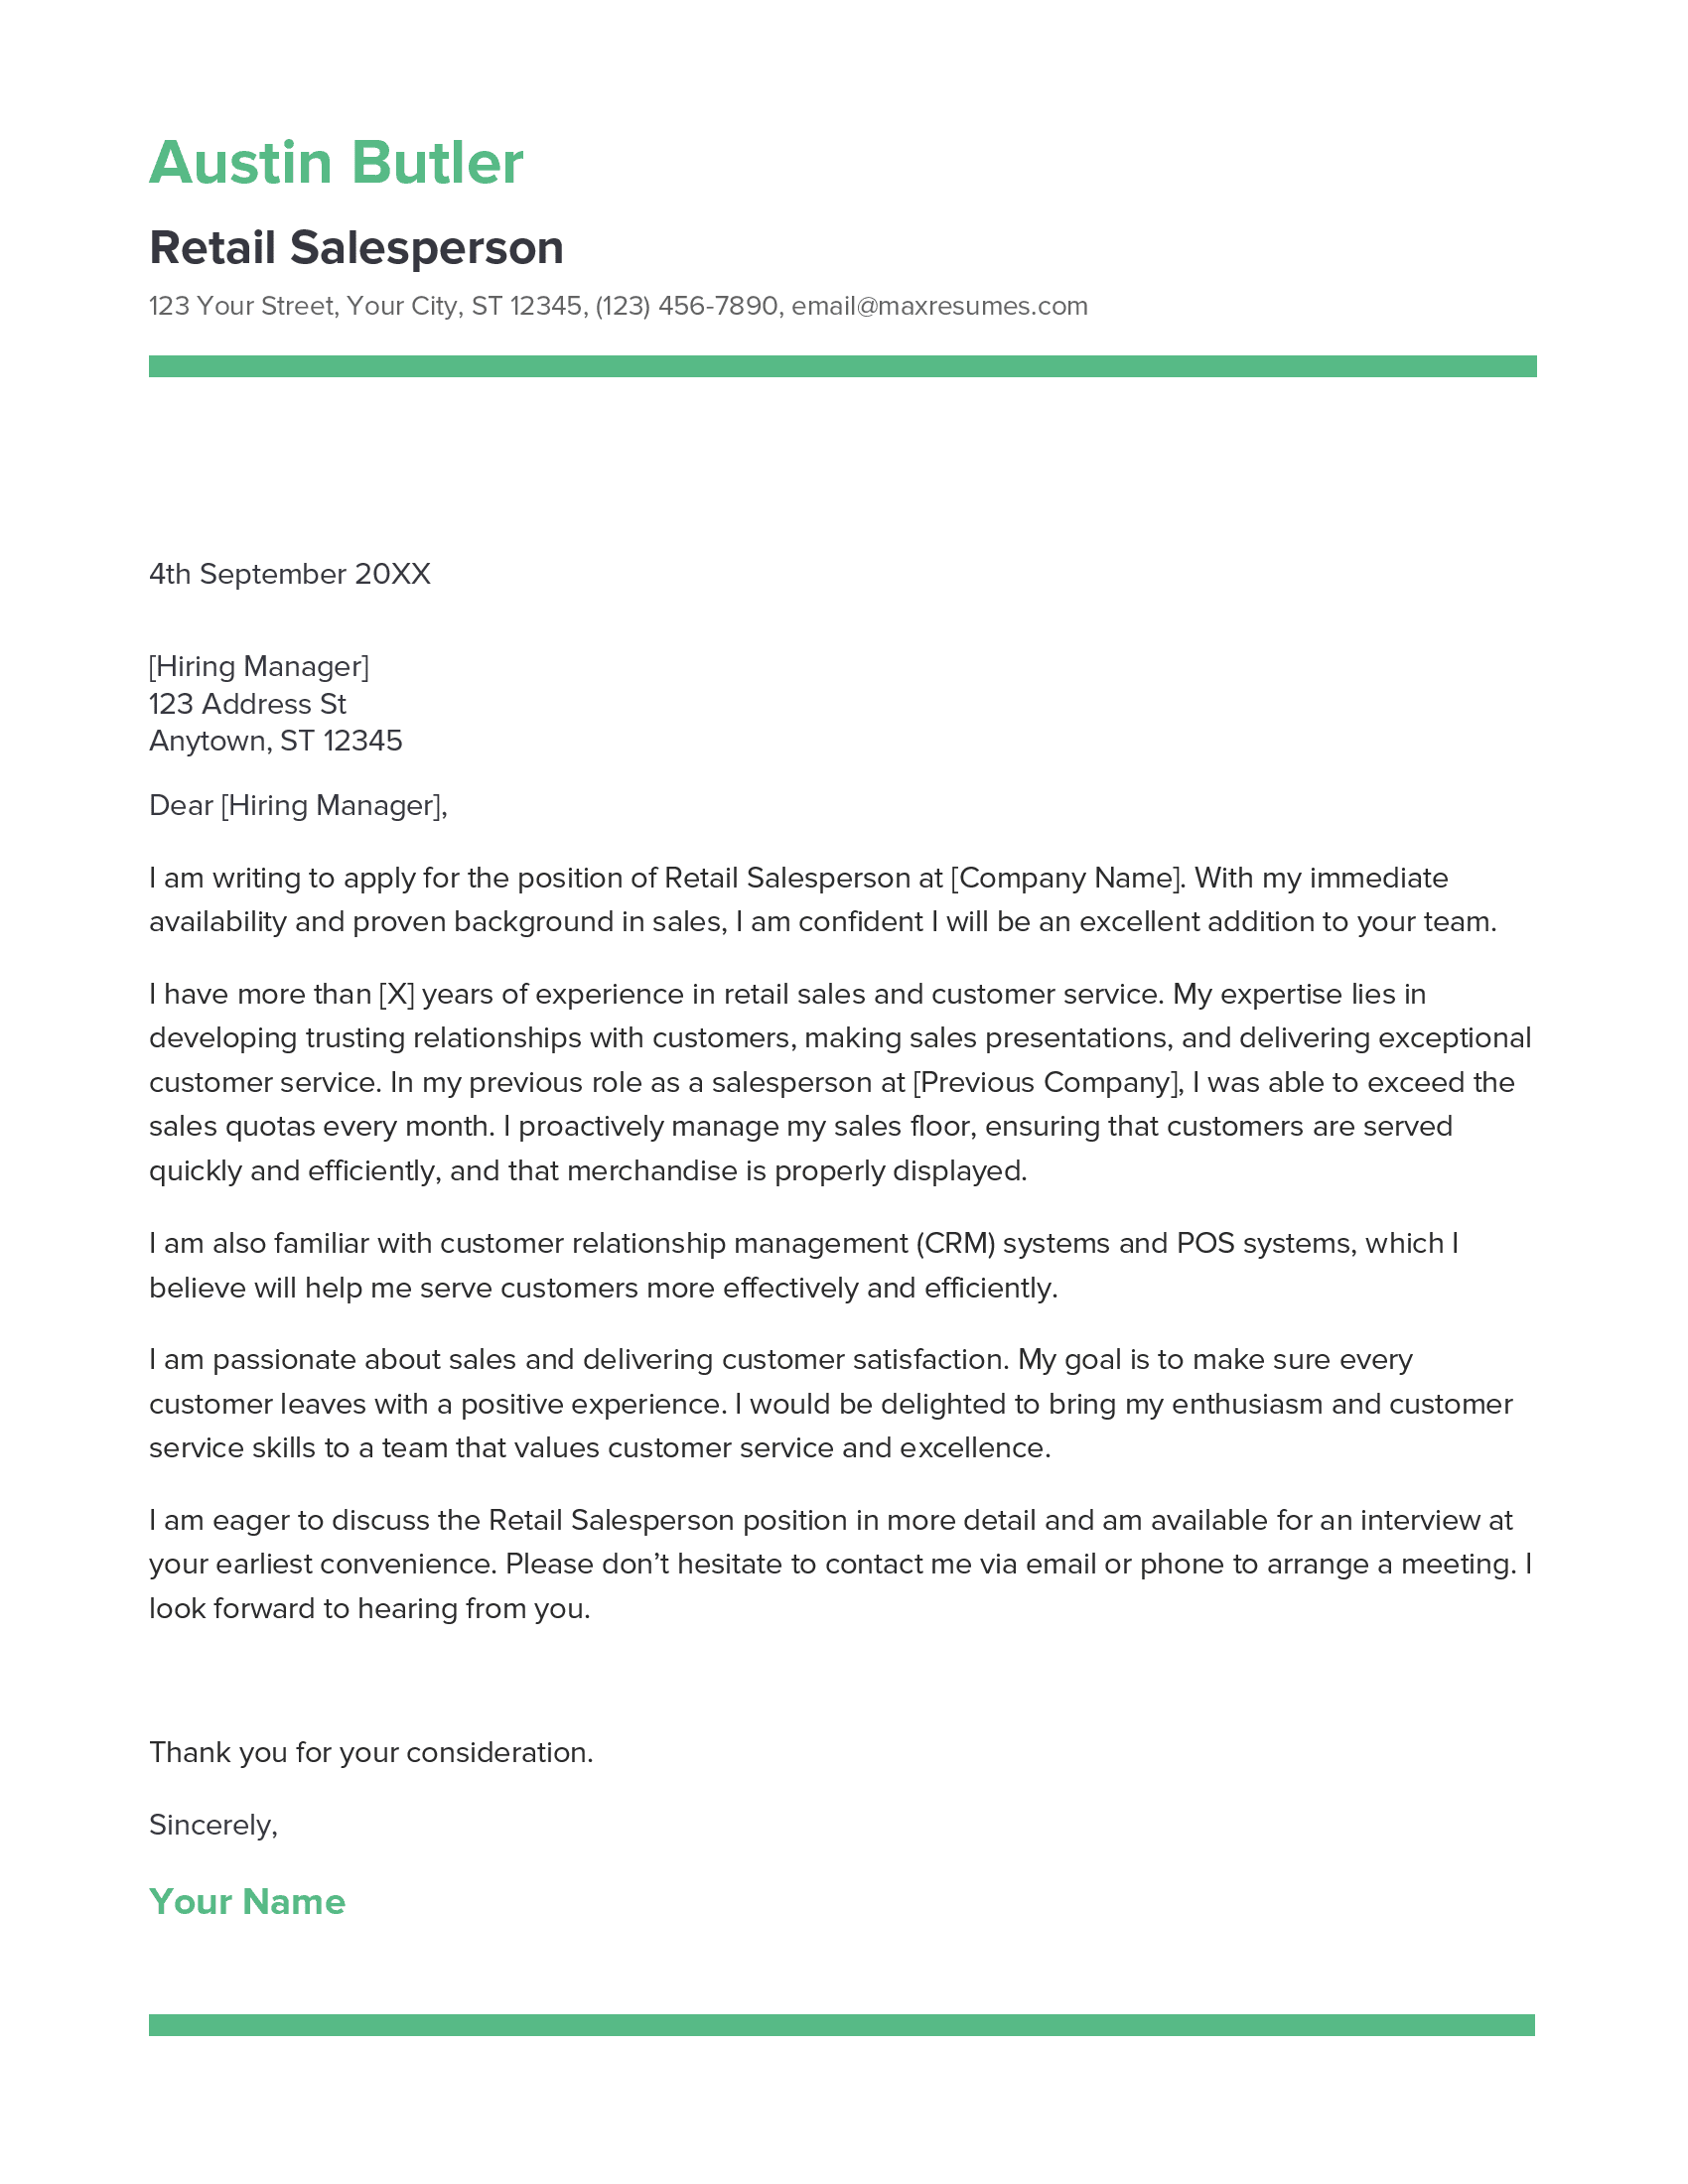 Retail Salesperson Cover Letter Example